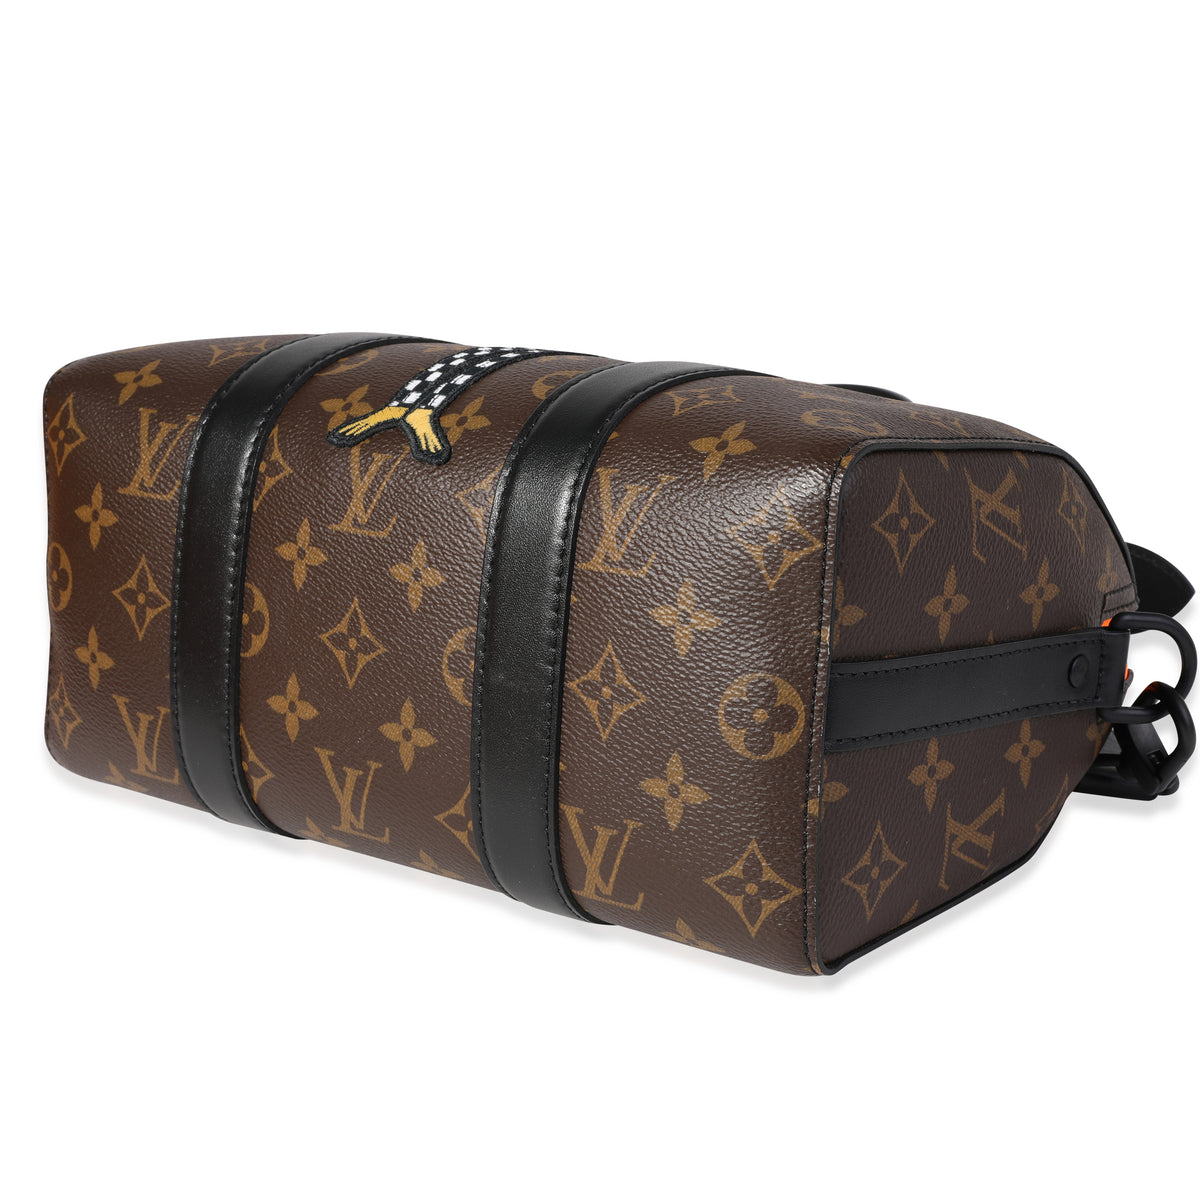 lv bag with cowhide